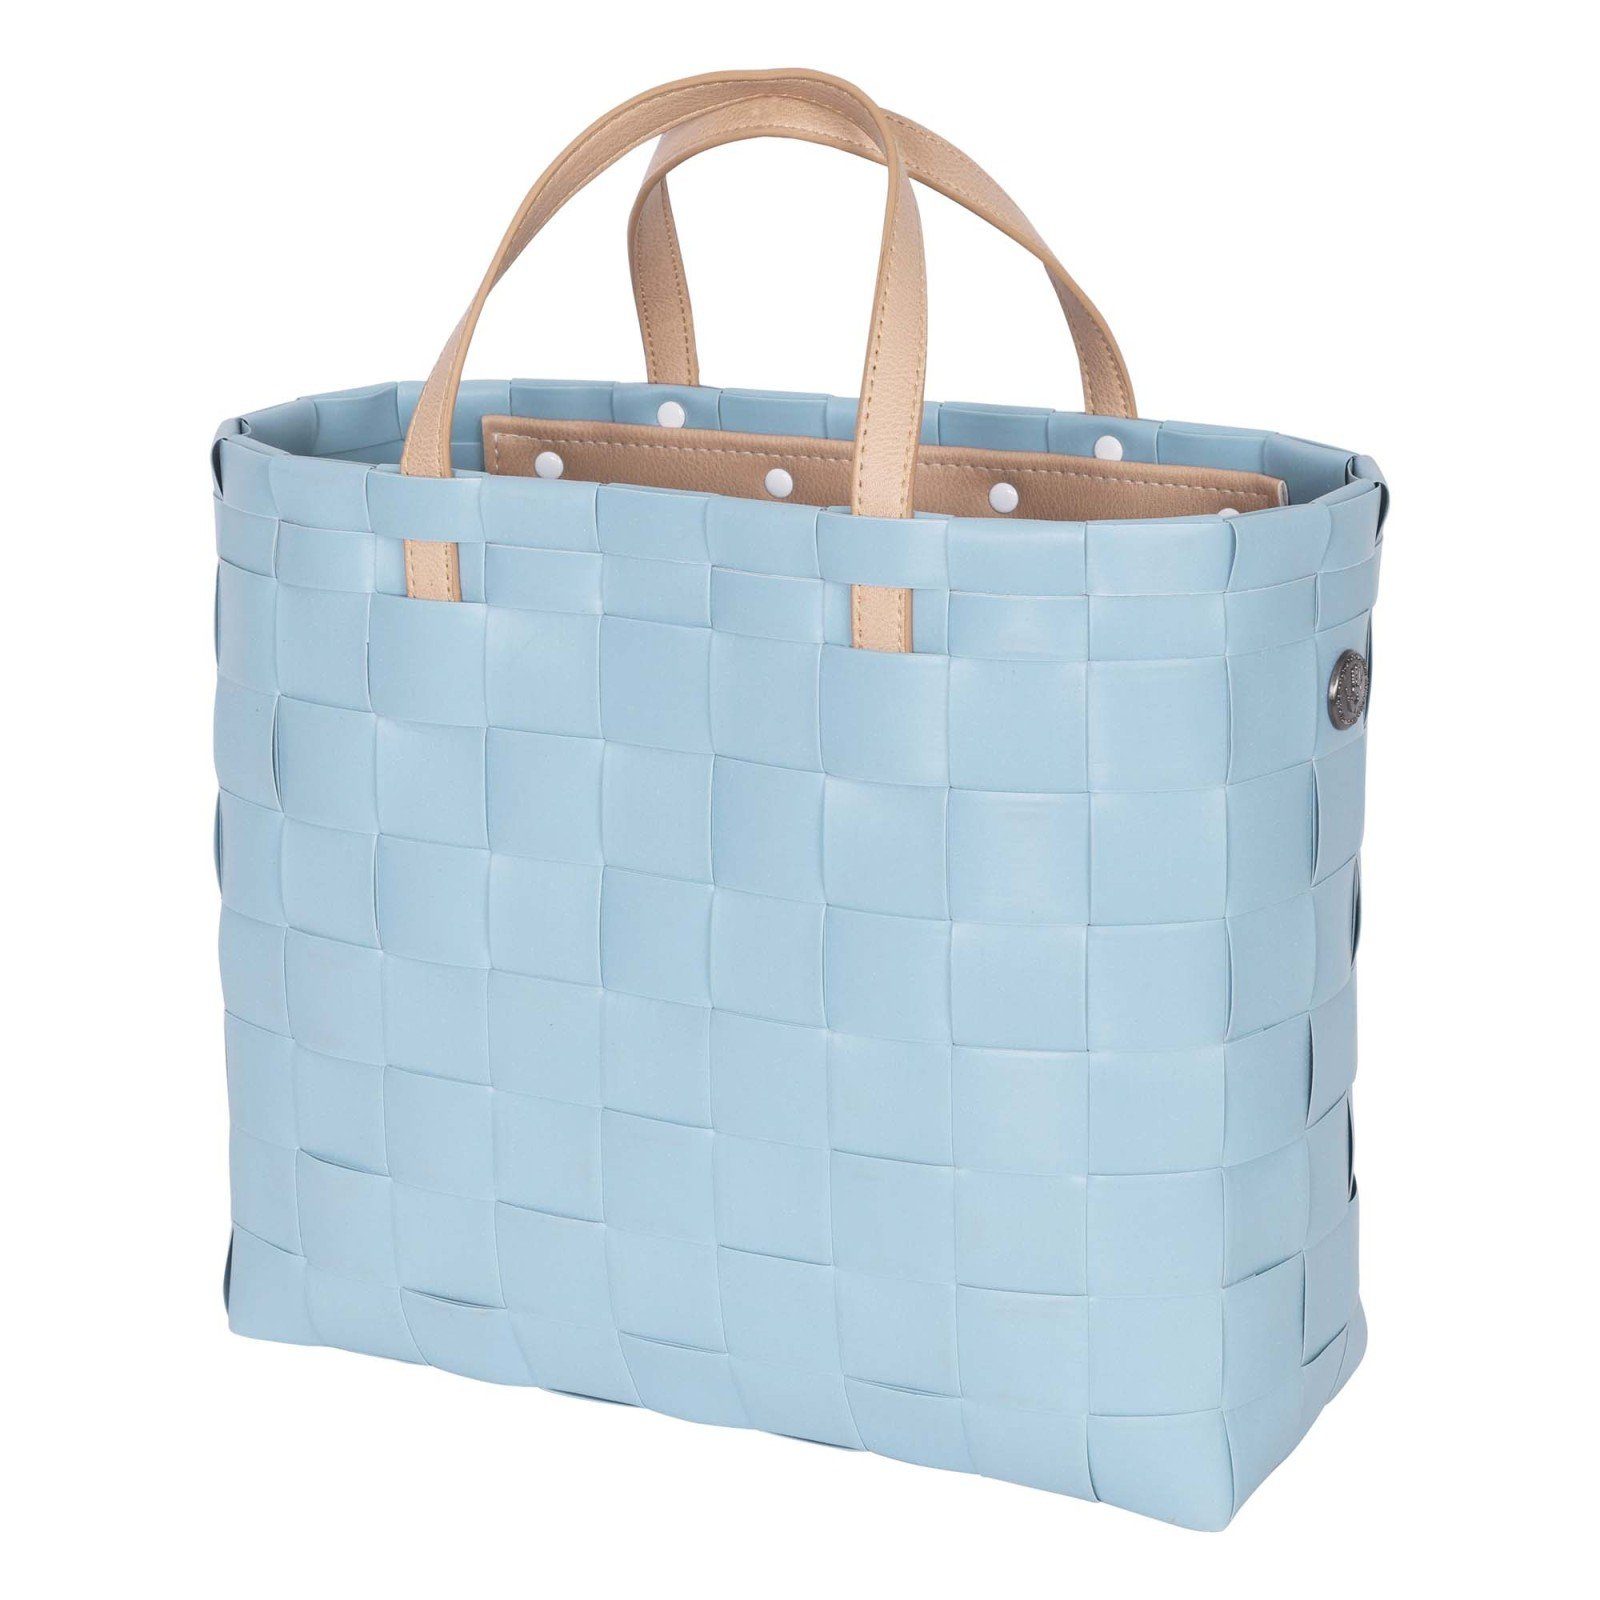 blau FADED Korb Einkaufsshopper Schulter hell Tasche Hand Handed By BY BLUE Bag Petite HANDED Shopper